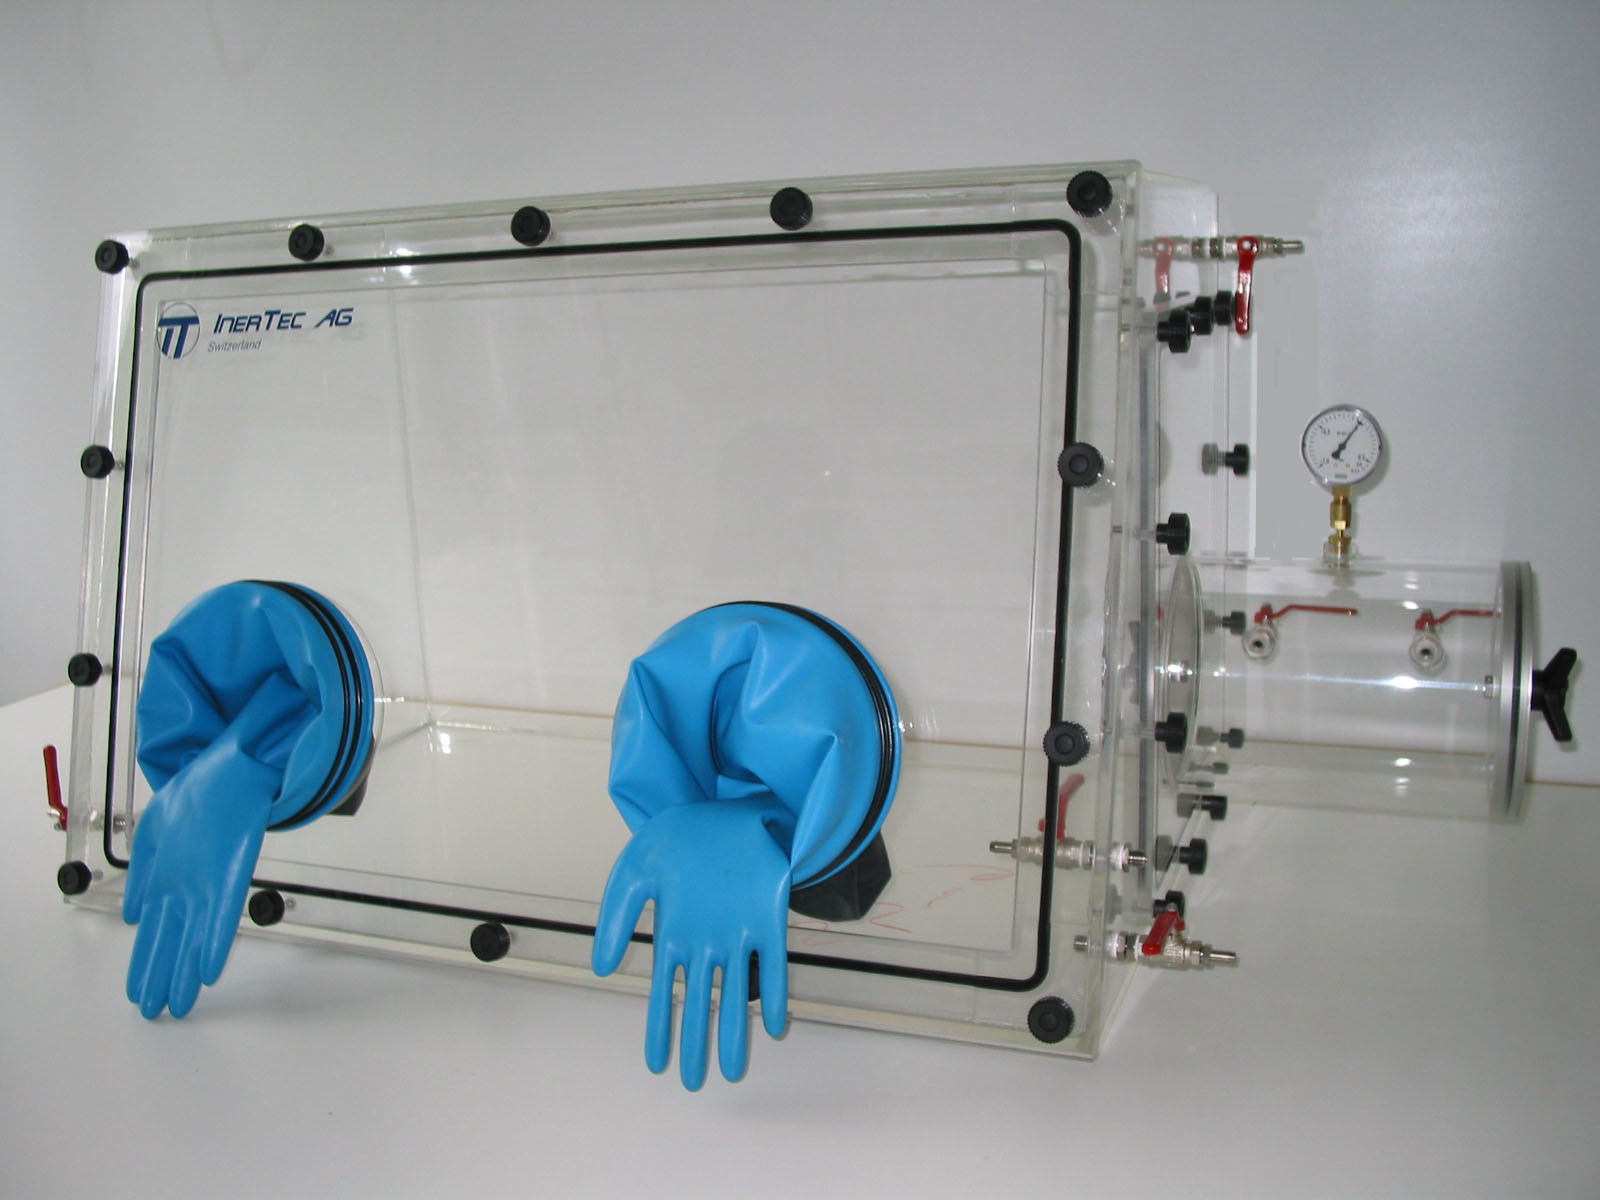 Glovebox made of acrylic&gt; Gas filling: automatic flushing with pressure control, front design: removable, side design: rectangular lock control: oxygen regulator with humidity display